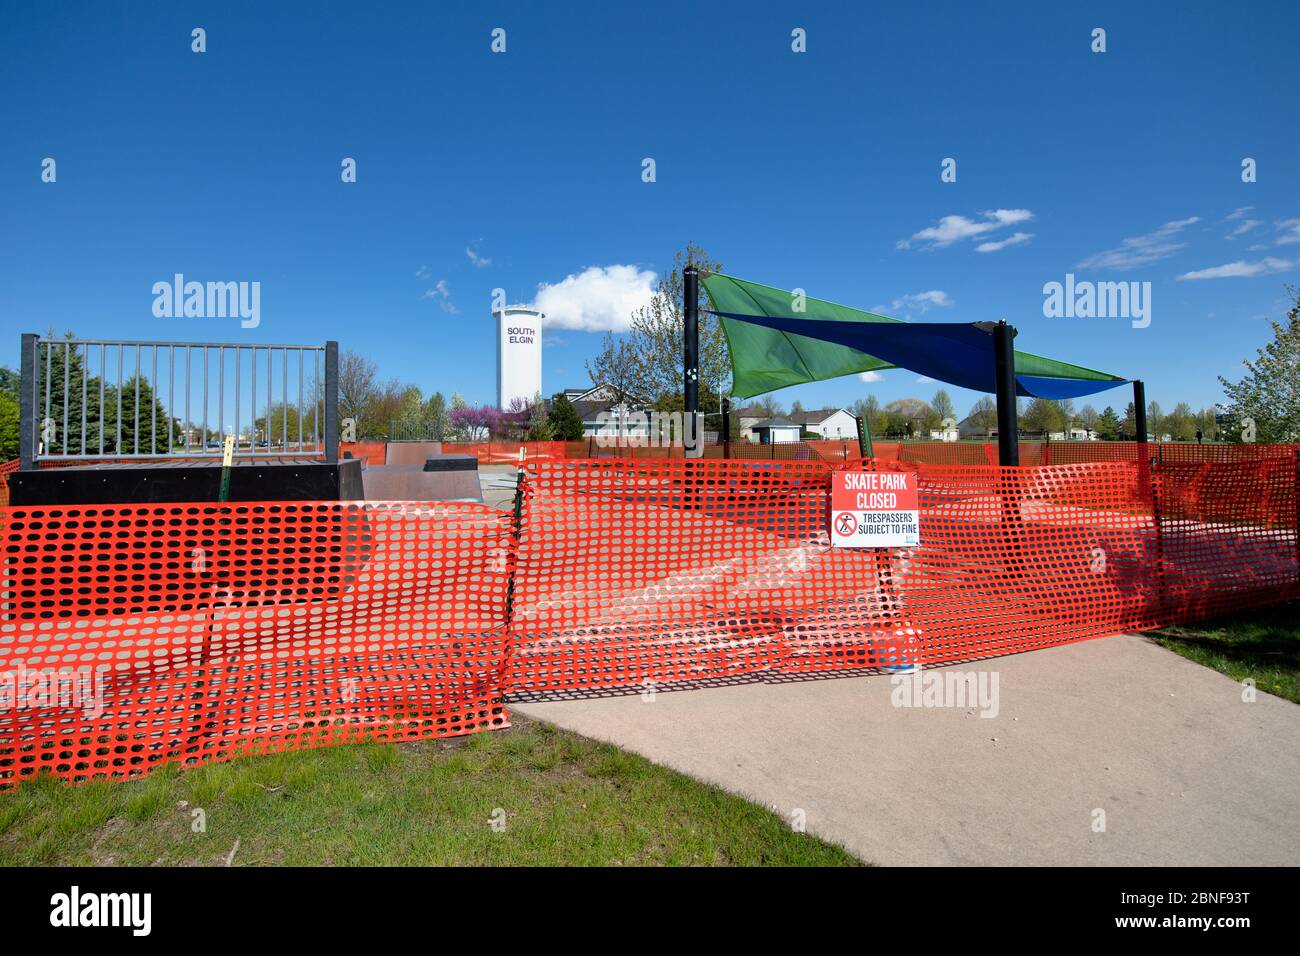 South Elgin, lllinois, USA. A sign located on temporary fencing around a skate facility at a public park warns users of possible penalties. Stock Photo